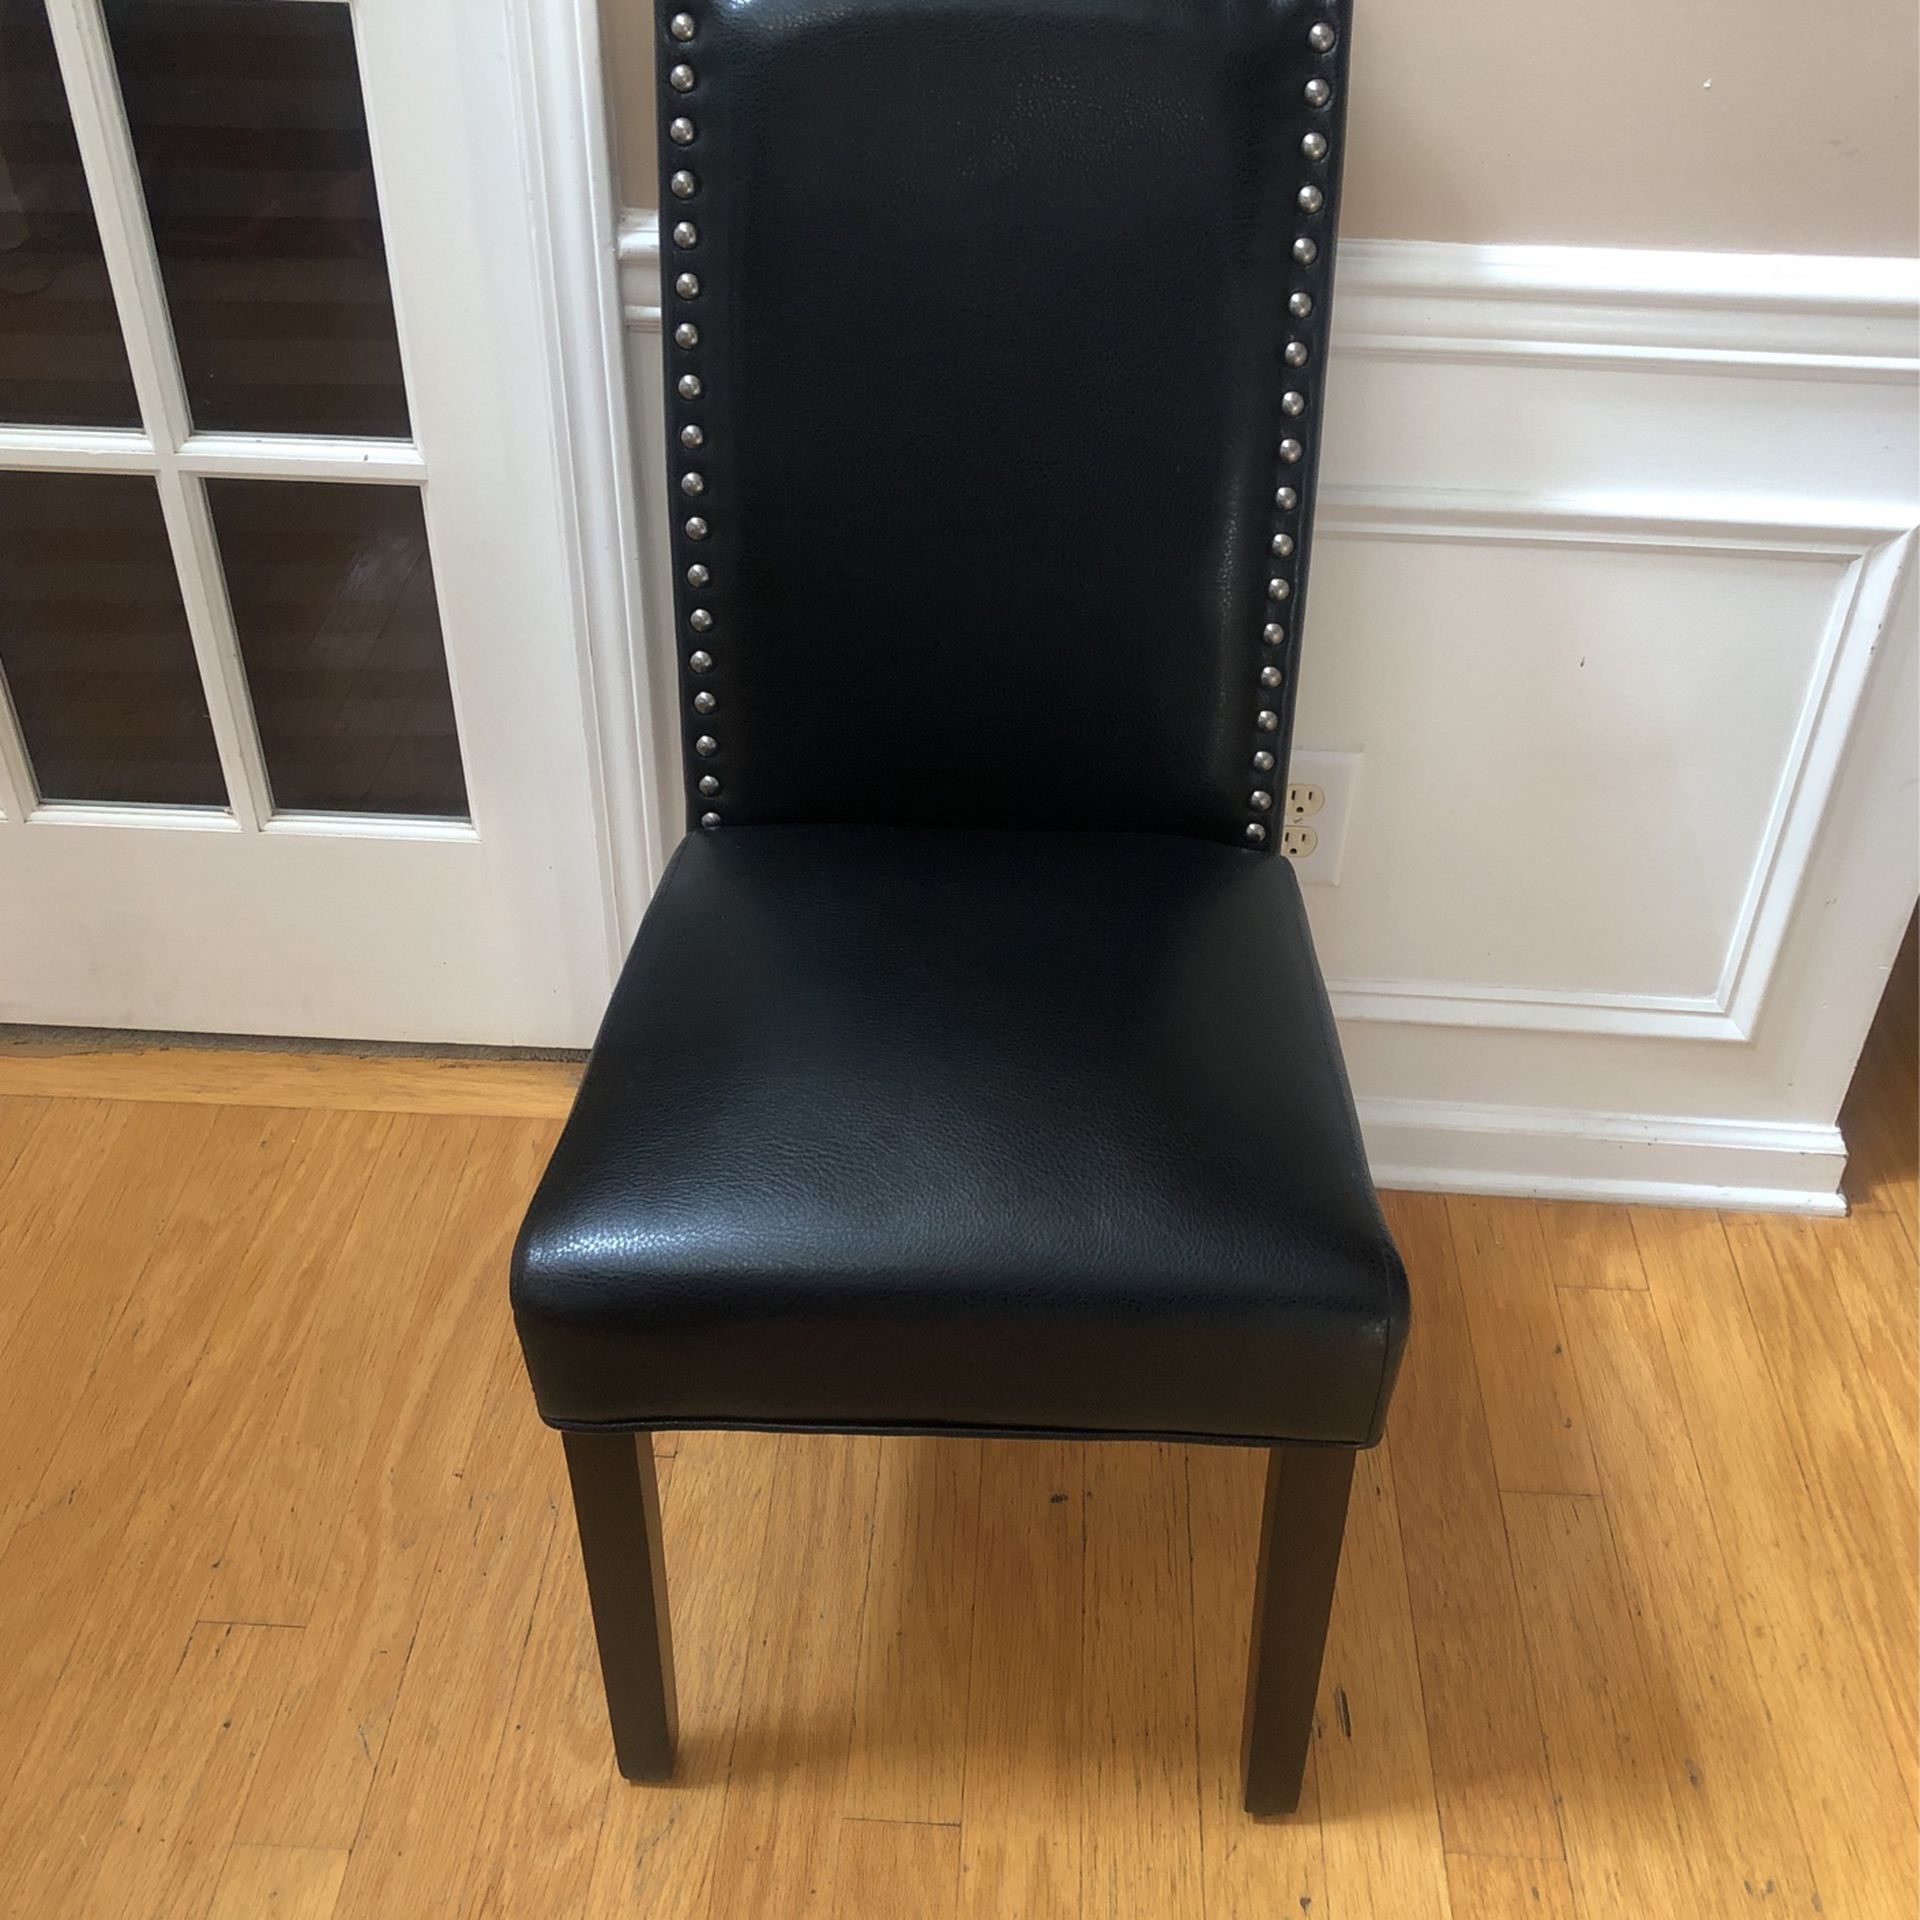 4 Dining Chairs (Like New)$40 Per Chair